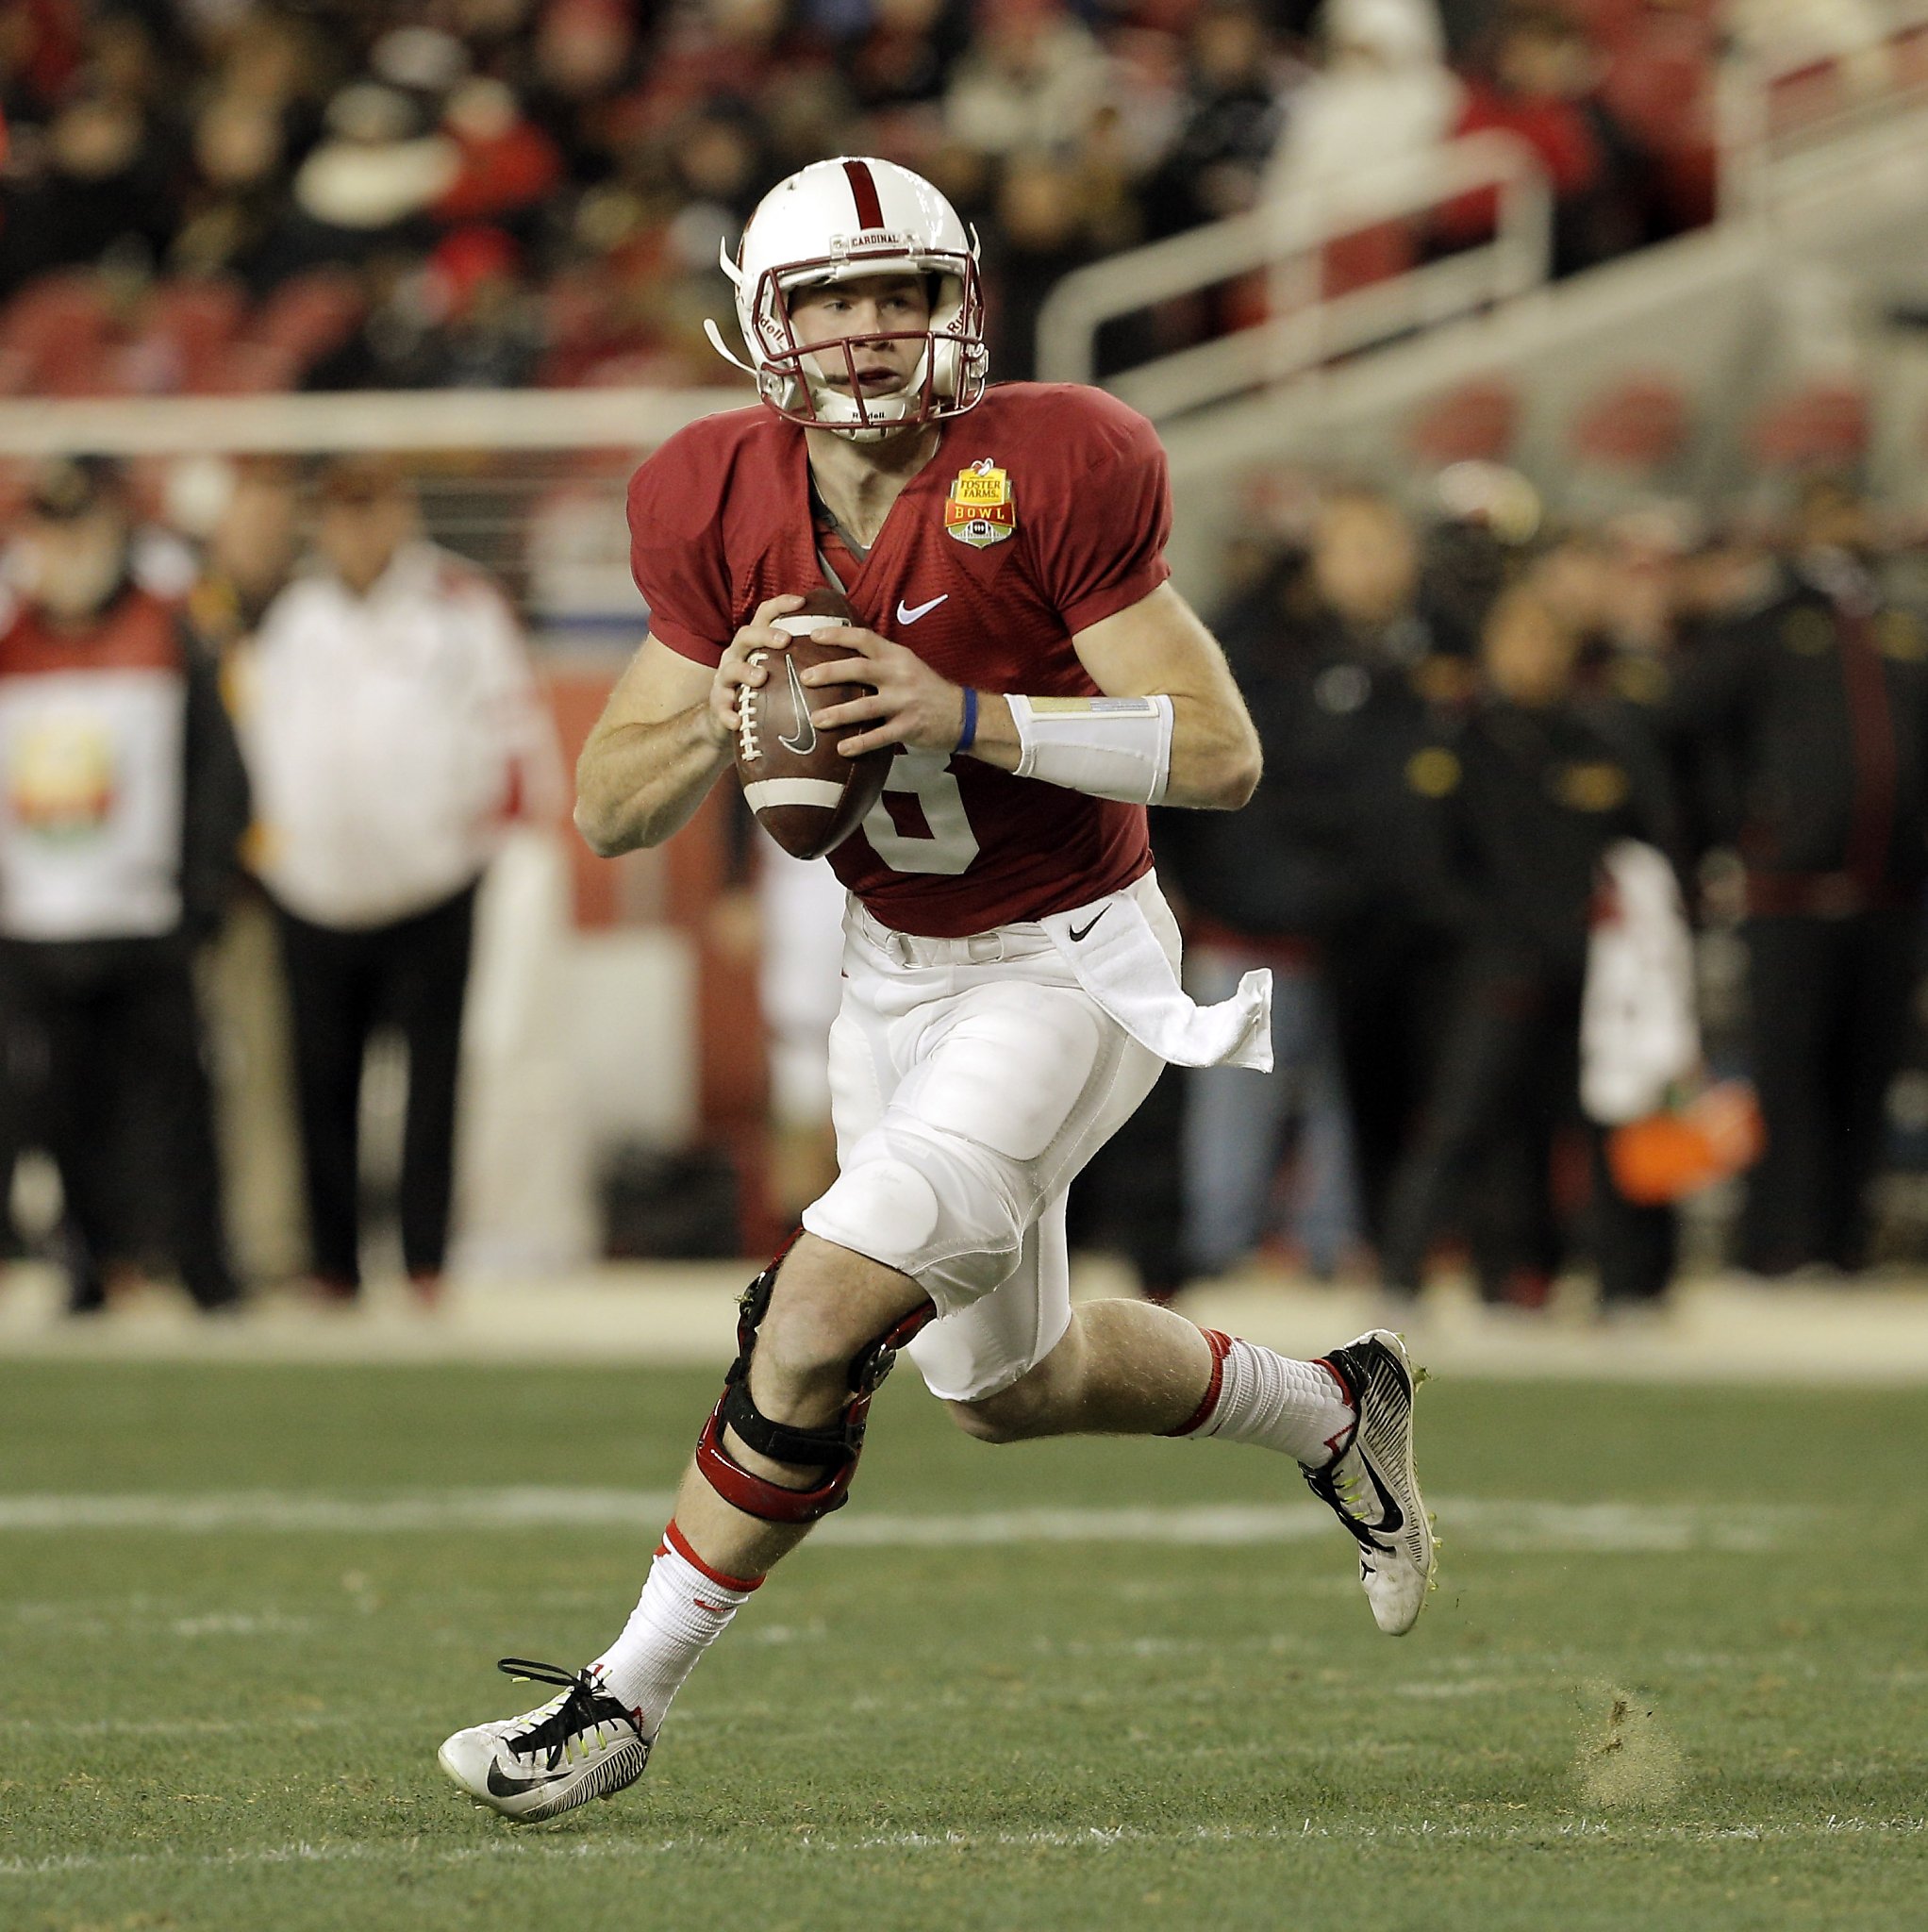 hoping to finish strong as Stanford's QB